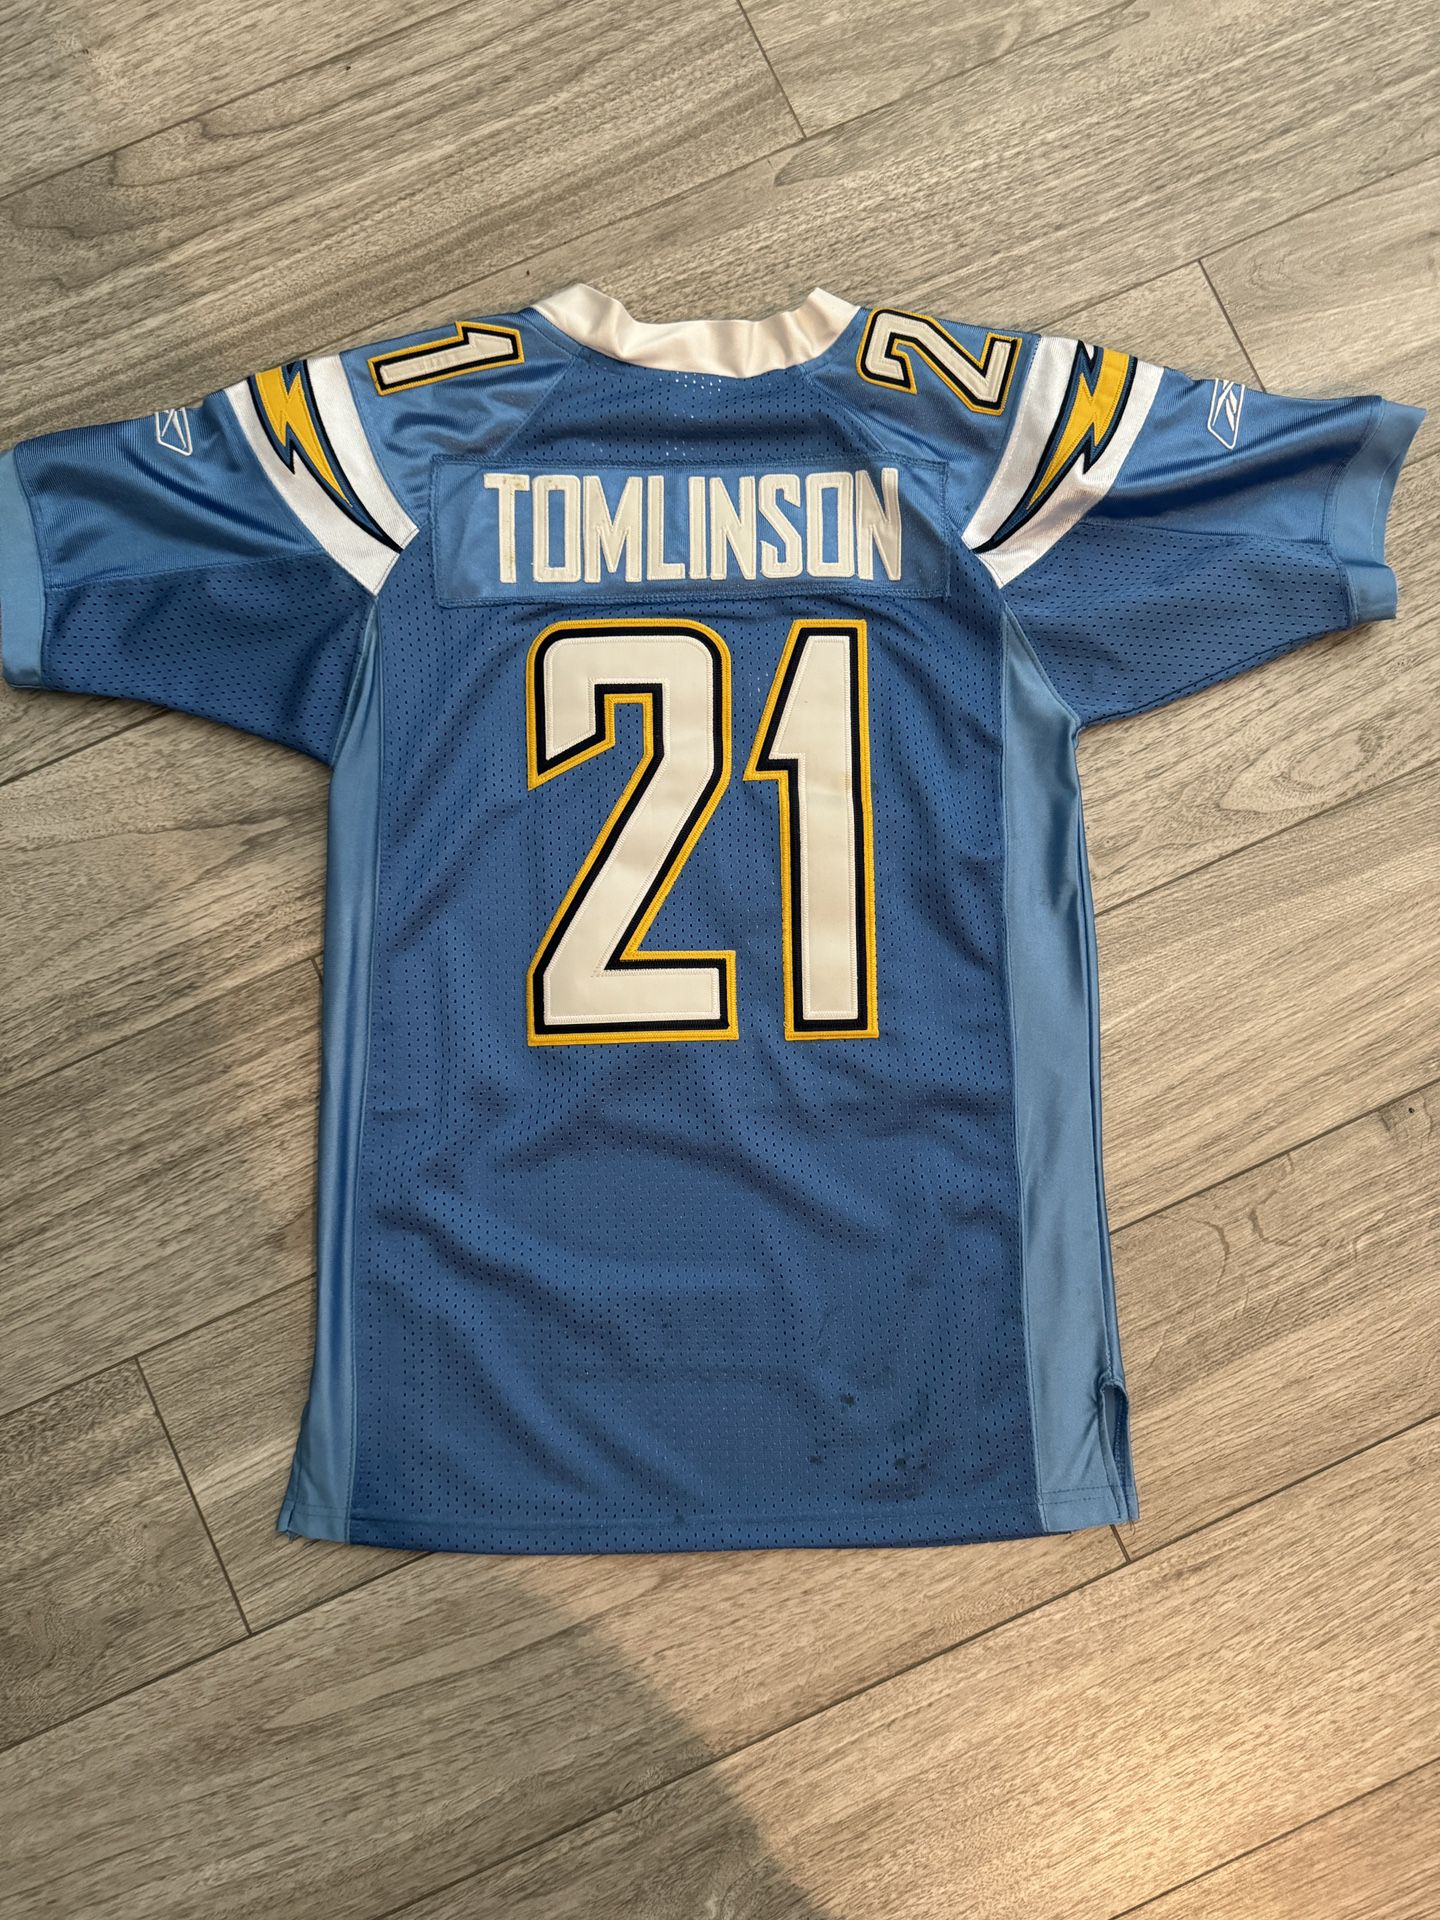 Chargers LaDainian Tomlinson Jersey Youth Large